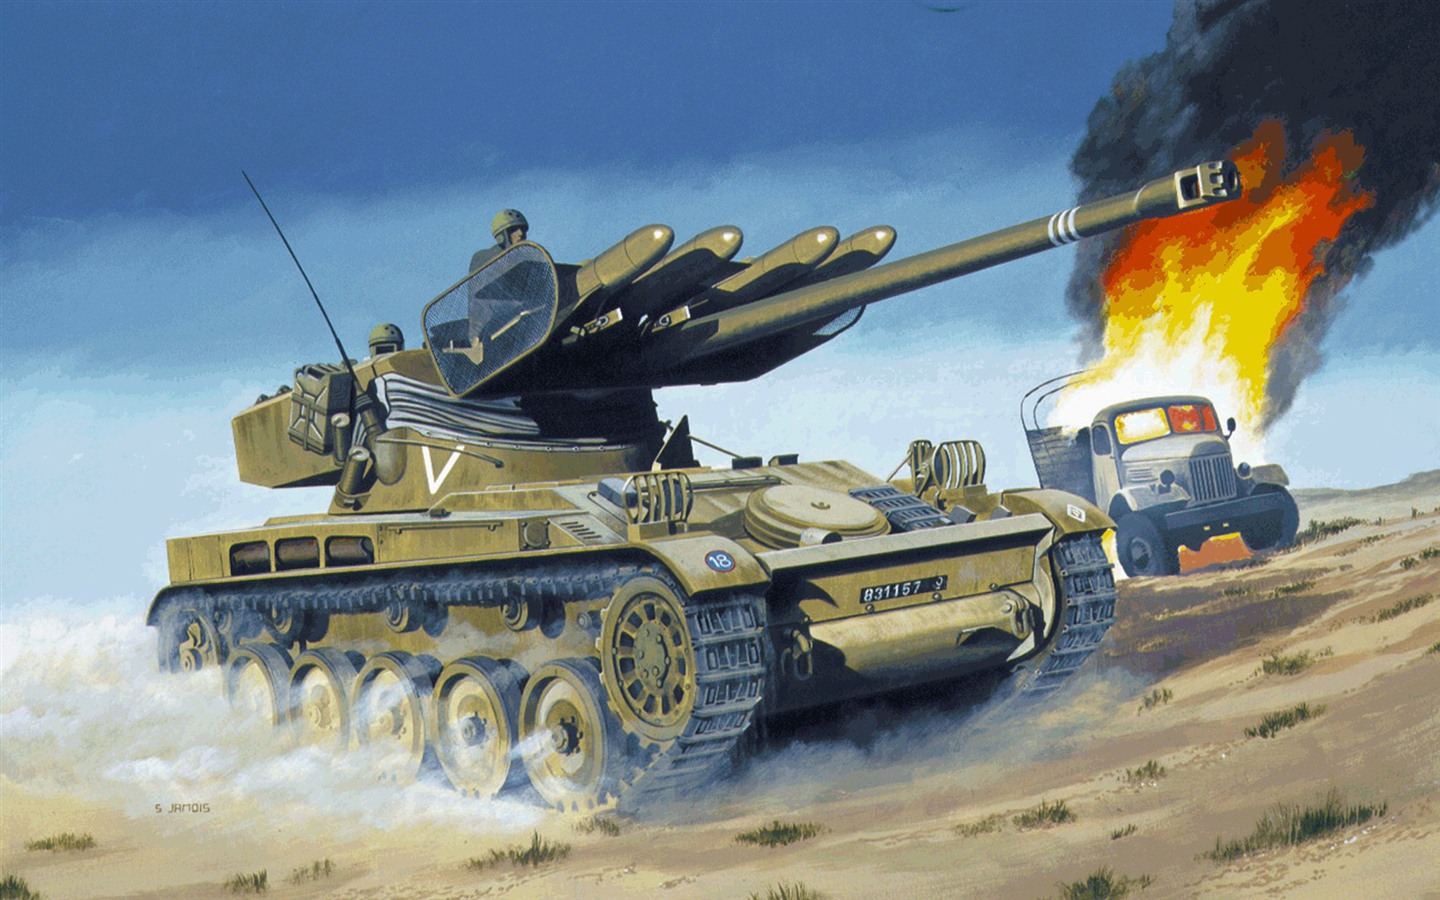 Military tanks, armored HD painting wallpapers #5 - 1440x900